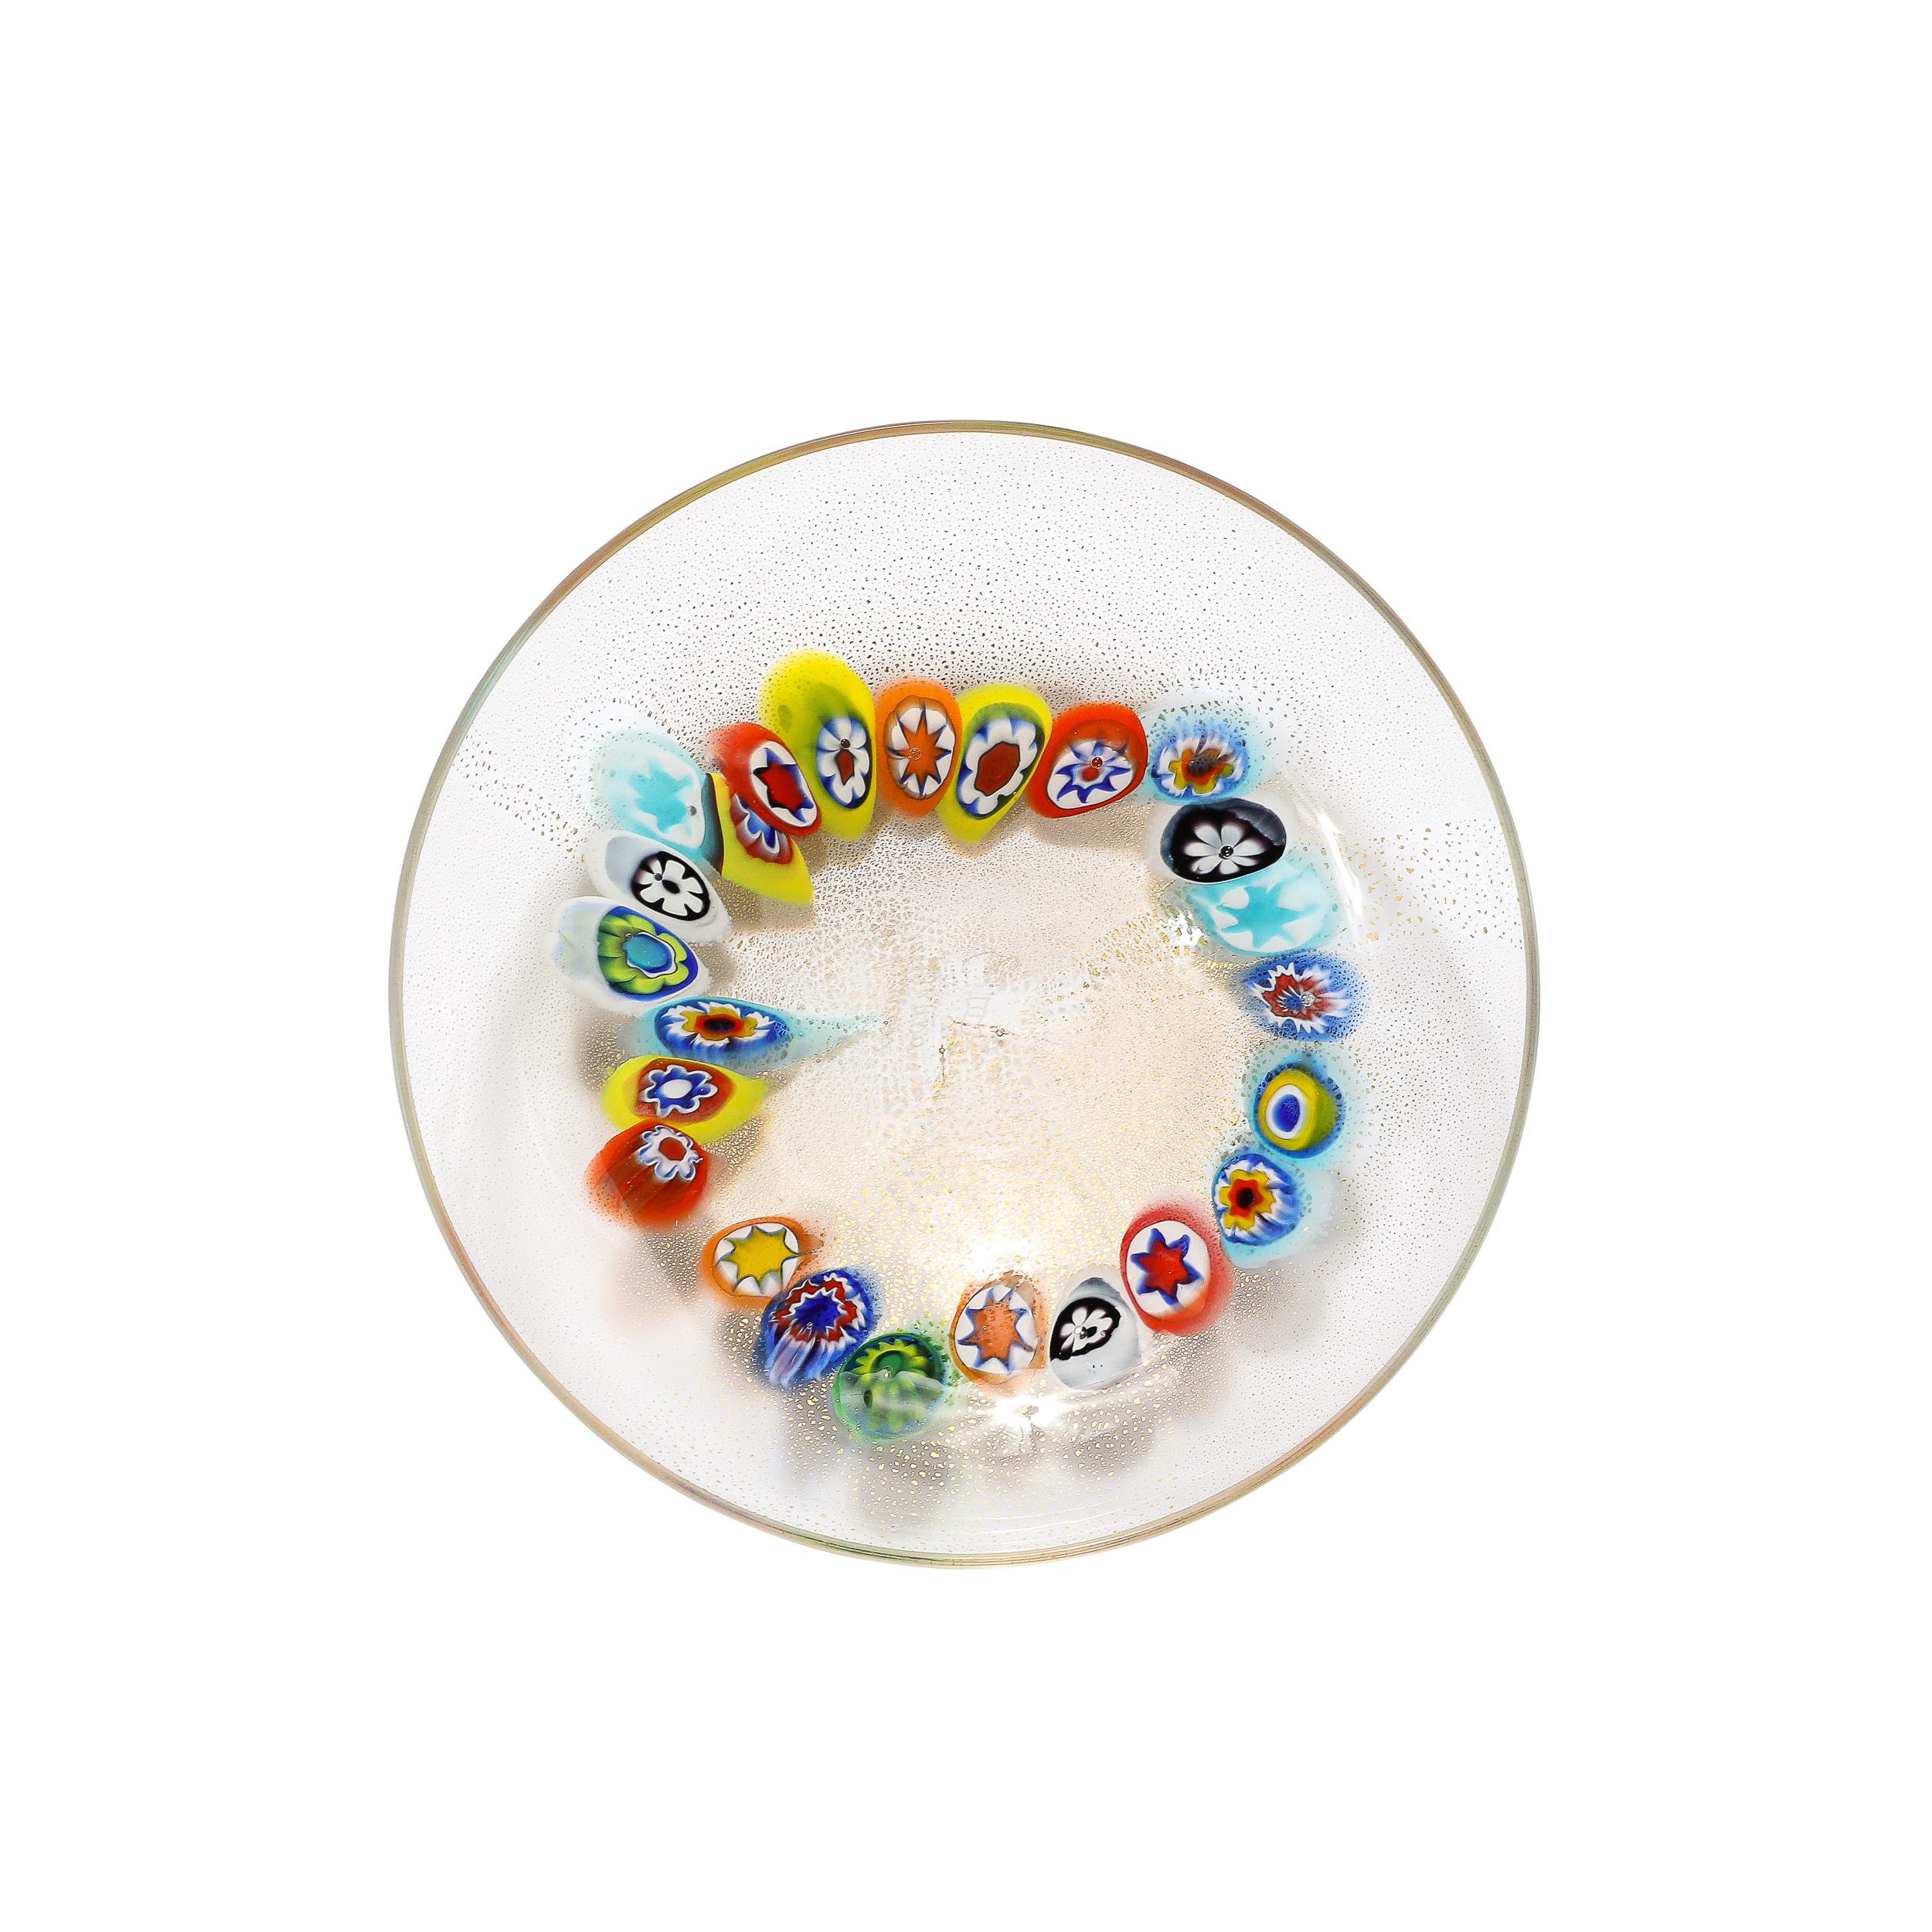 This rare and stunning Mid-Century Modernist Hand-Blown Murano Millifiori & 24 Karat Gold Flecked Glass Plate is Signed Schiavon and originates from Italy, Circa 1960. Featuring a stunning array of glittering colors within the millefiori detailing